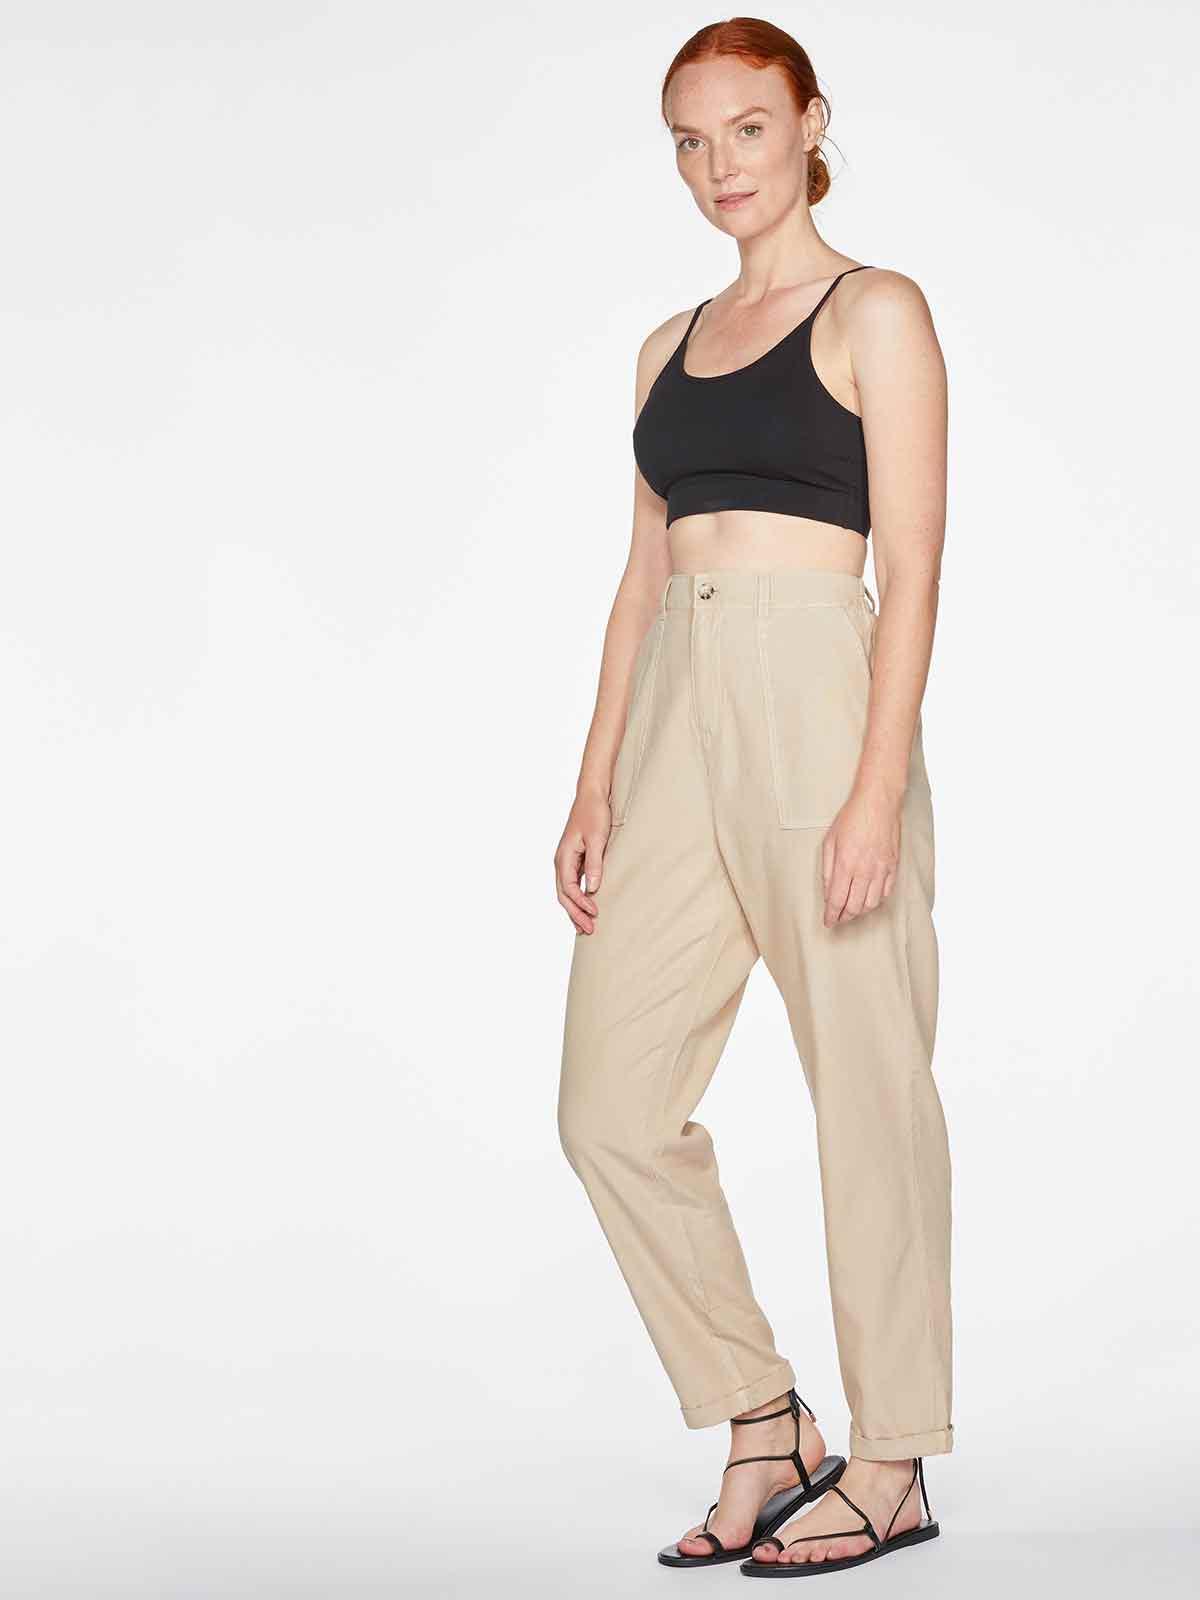 Cora Chino Trousers - Sand Cream - Thought Clothing UK